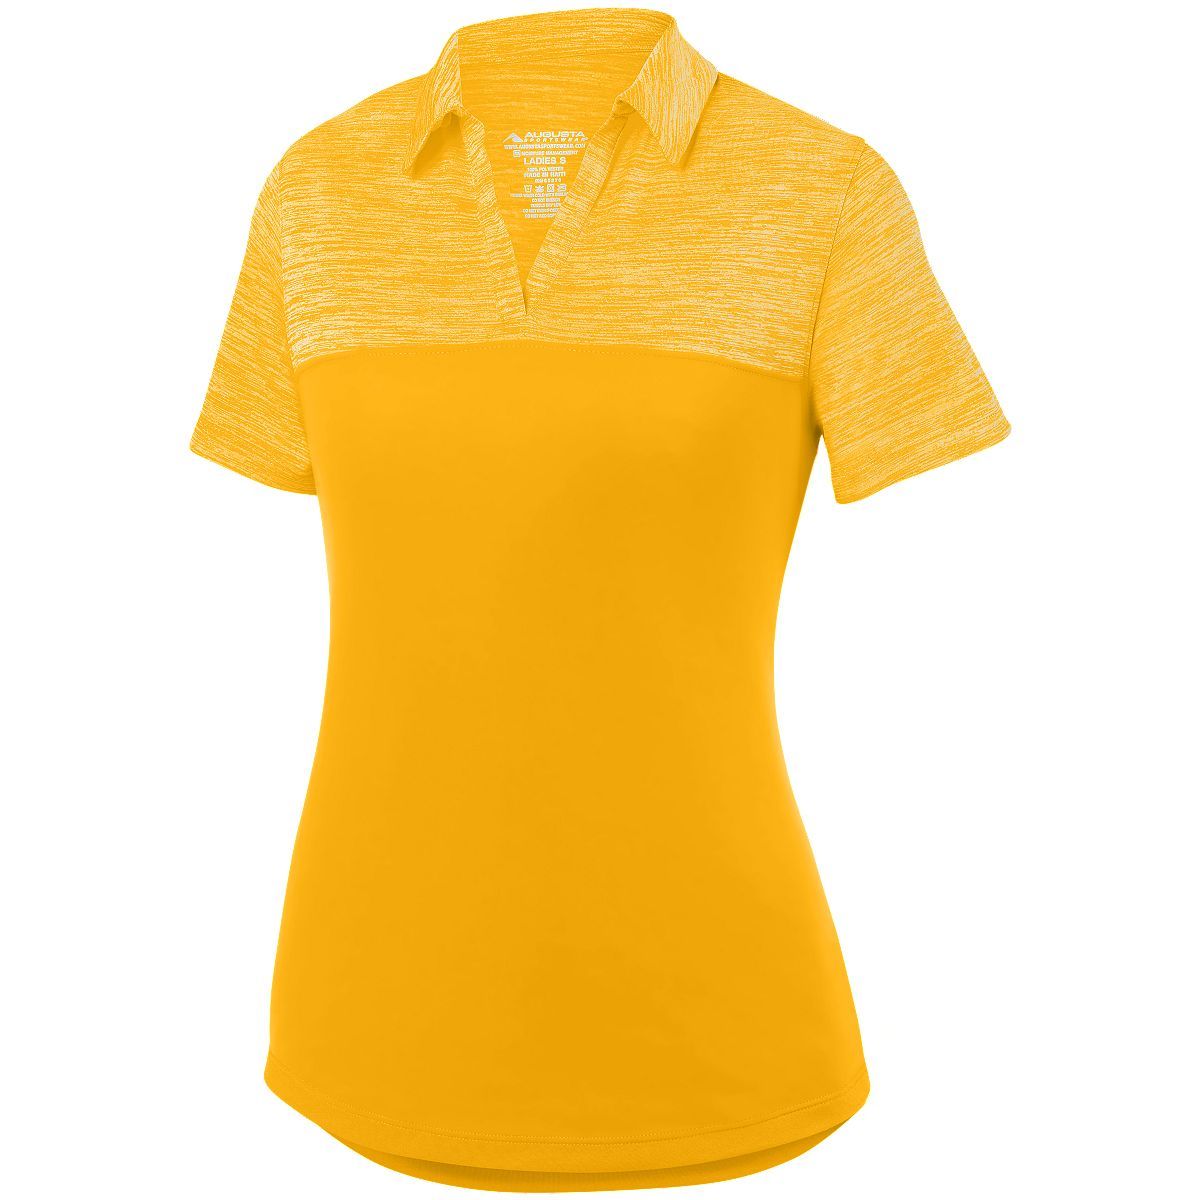 Augusta Sportswear Ladies Shadow Tonal Heather Polo in Gold  -Part of the Ladies, Ladies-Polo, Polos, Augusta-Products, Shirts, Tonal-Fleece-Collection product lines at KanaleyCreations.com